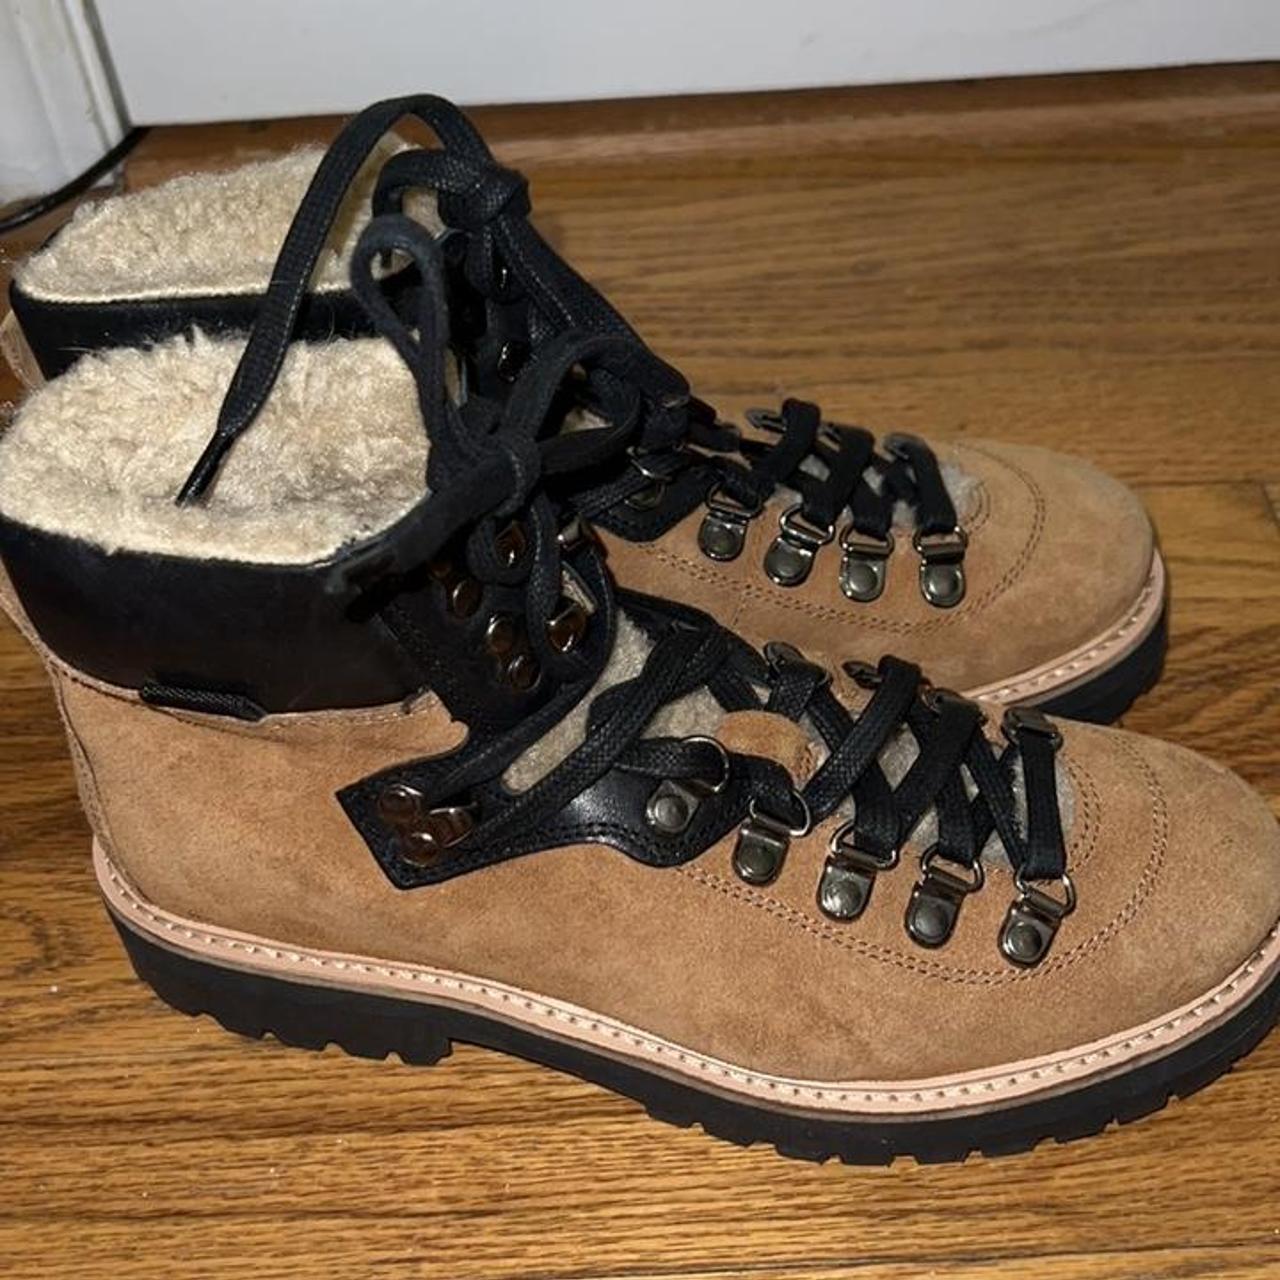 Urban outfitters Sherpa hiking boots in size 8, worn... - Depop